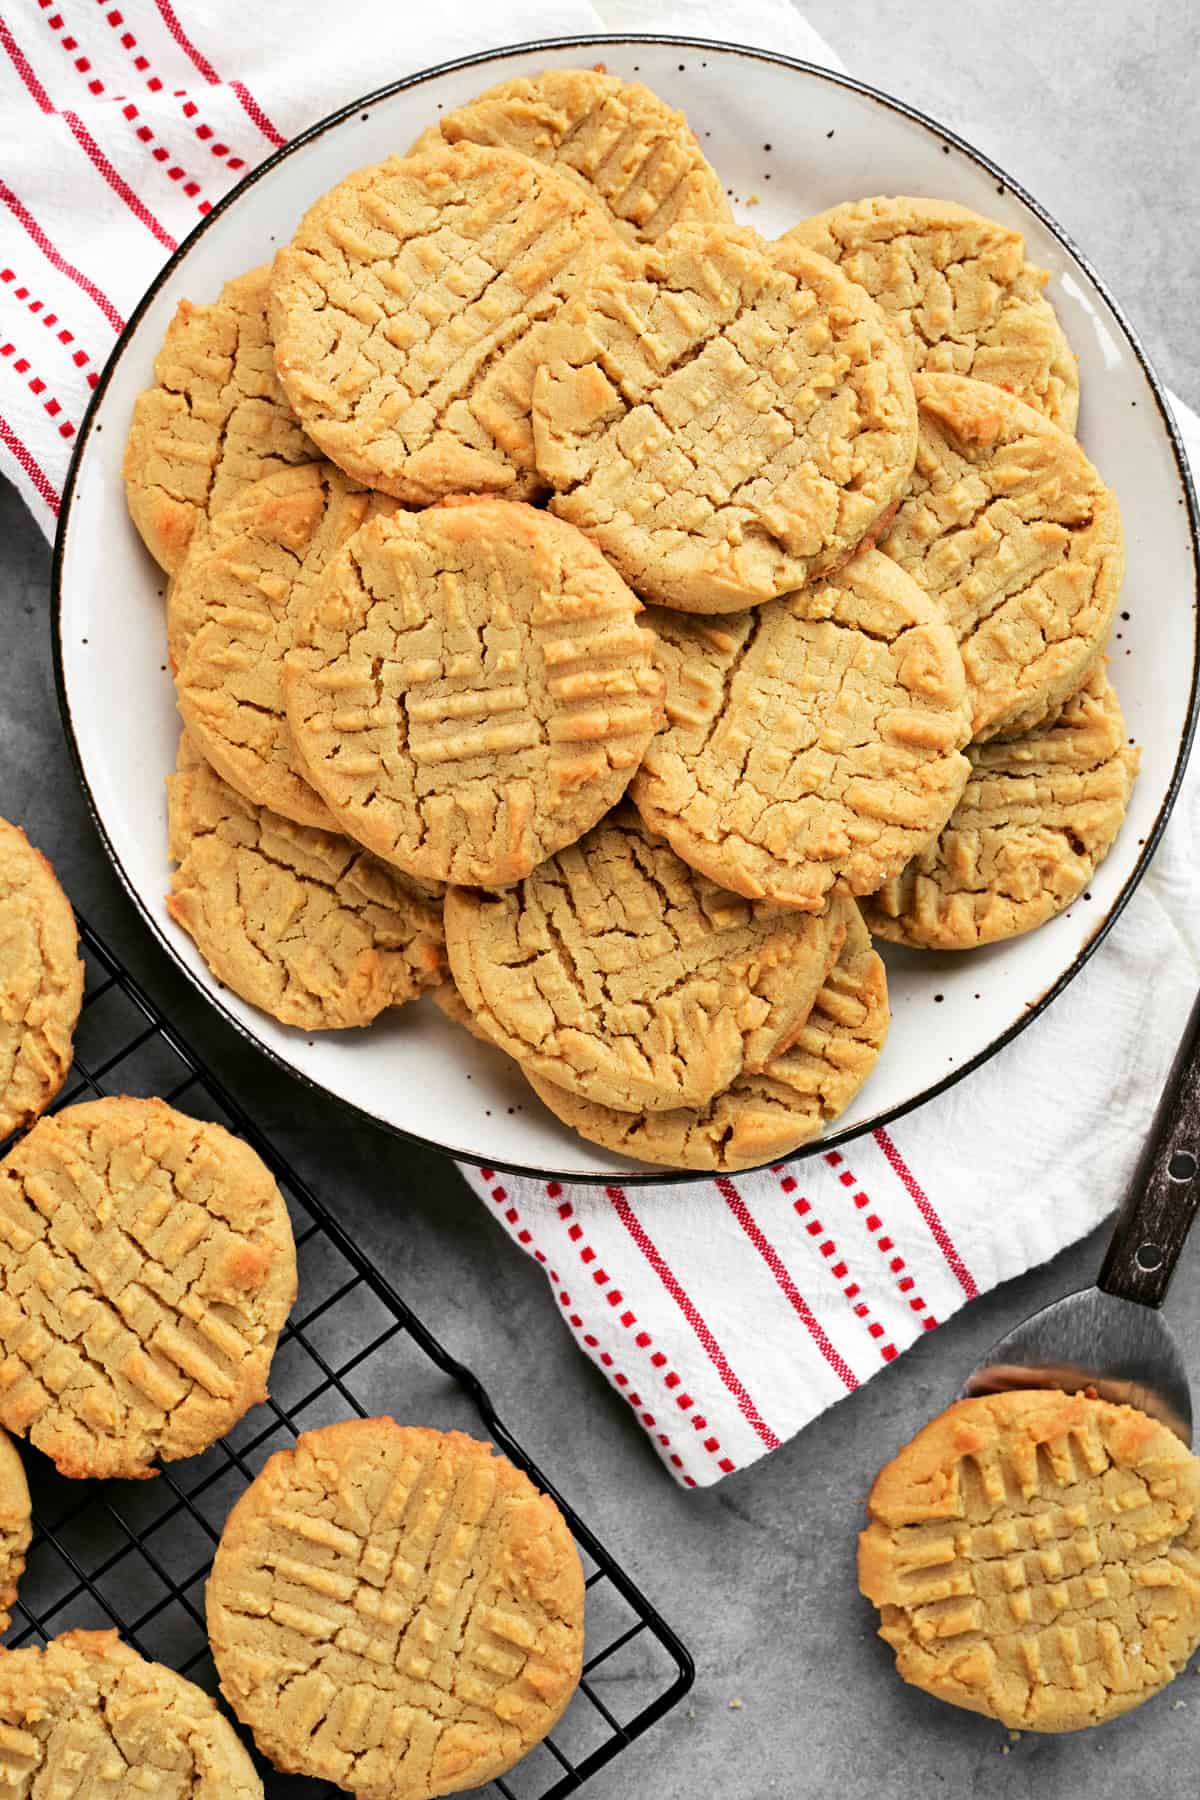 Peanut Butter Cookies - The Gunny Sack